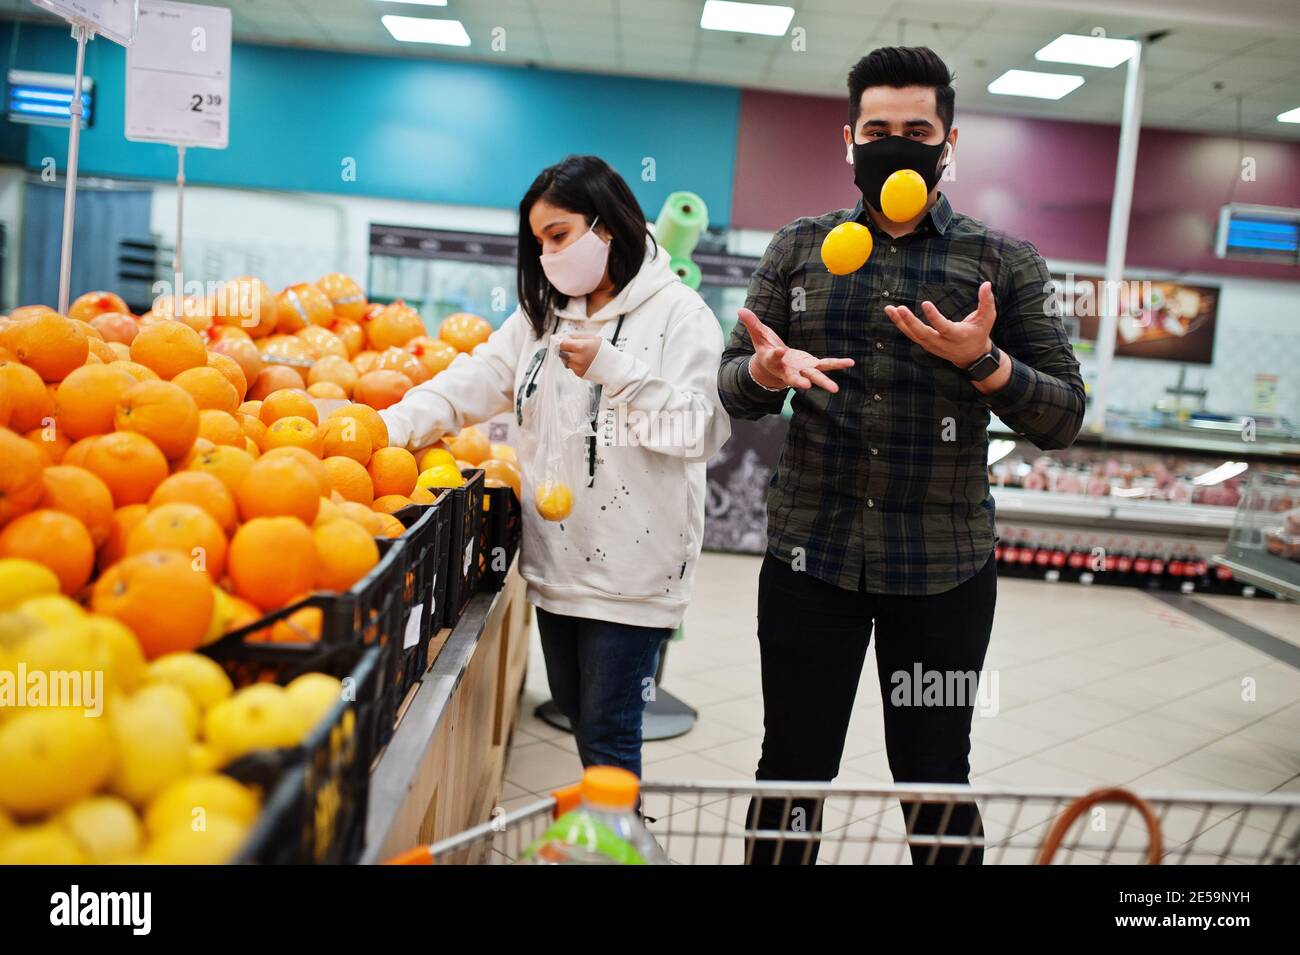 Asian couple wear in protective face mask shopping together in supermarket during pandemic. Choosing different fruits. Stock Photo